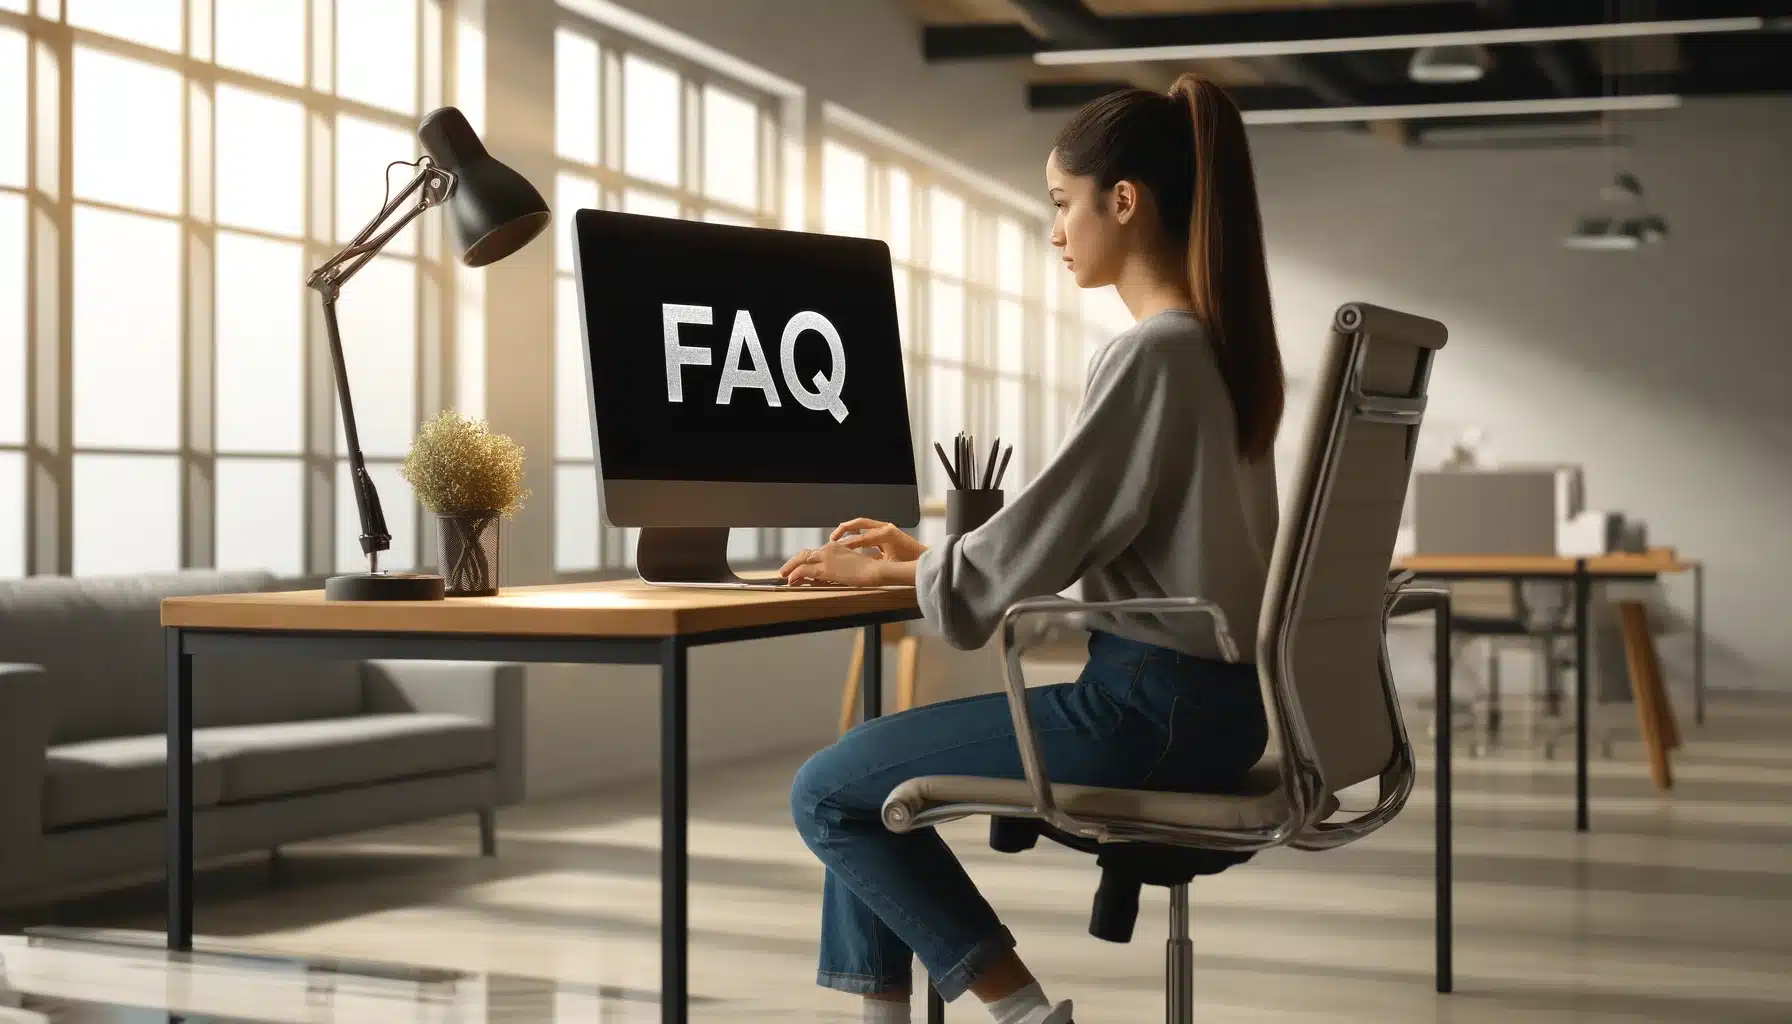 A young Hispanic female works on a laptop displaying 'FAQ' in a modern office setting, emphasizing her role in managing digital communications effectively without repeating focus keywords.